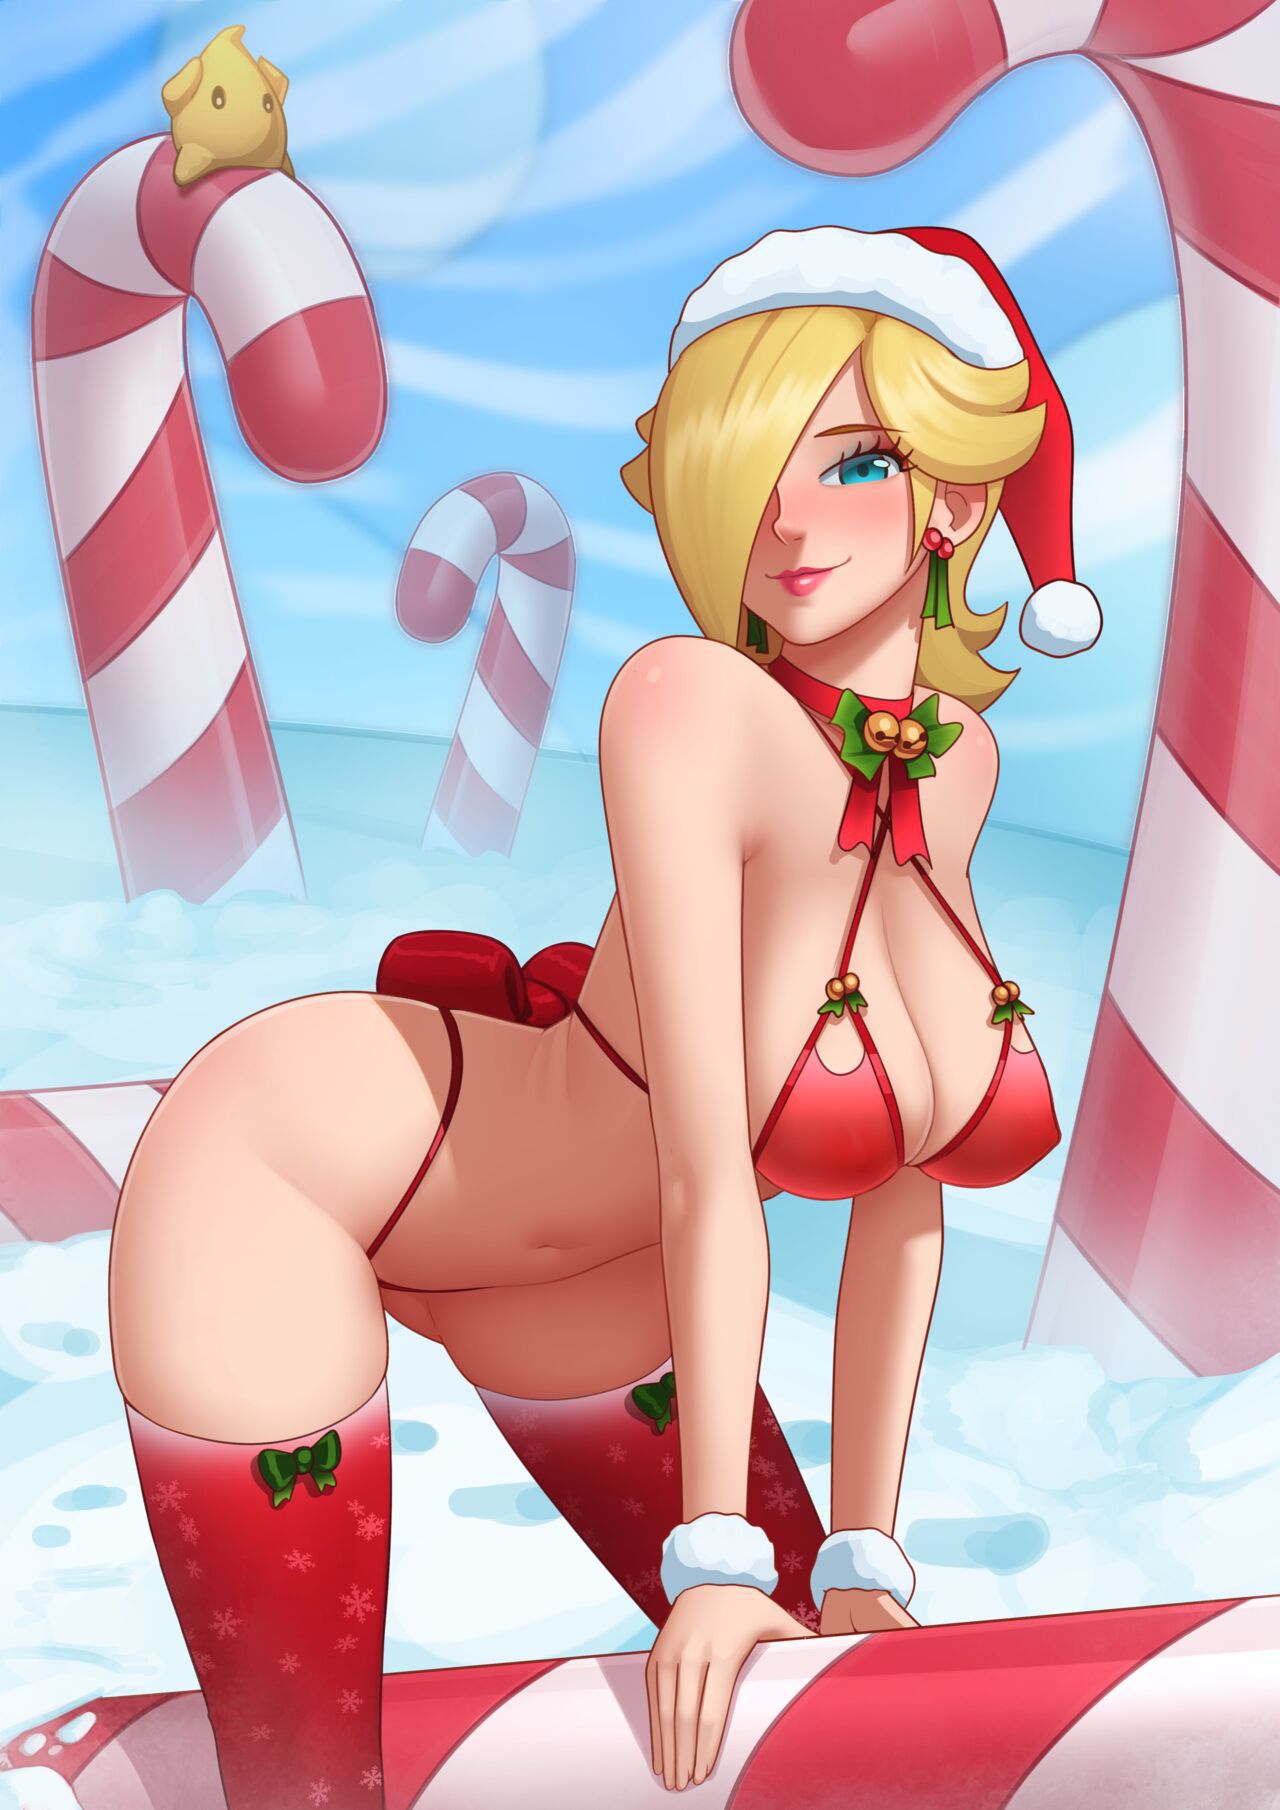 [Deilan12] Candy Canes Appeared 2